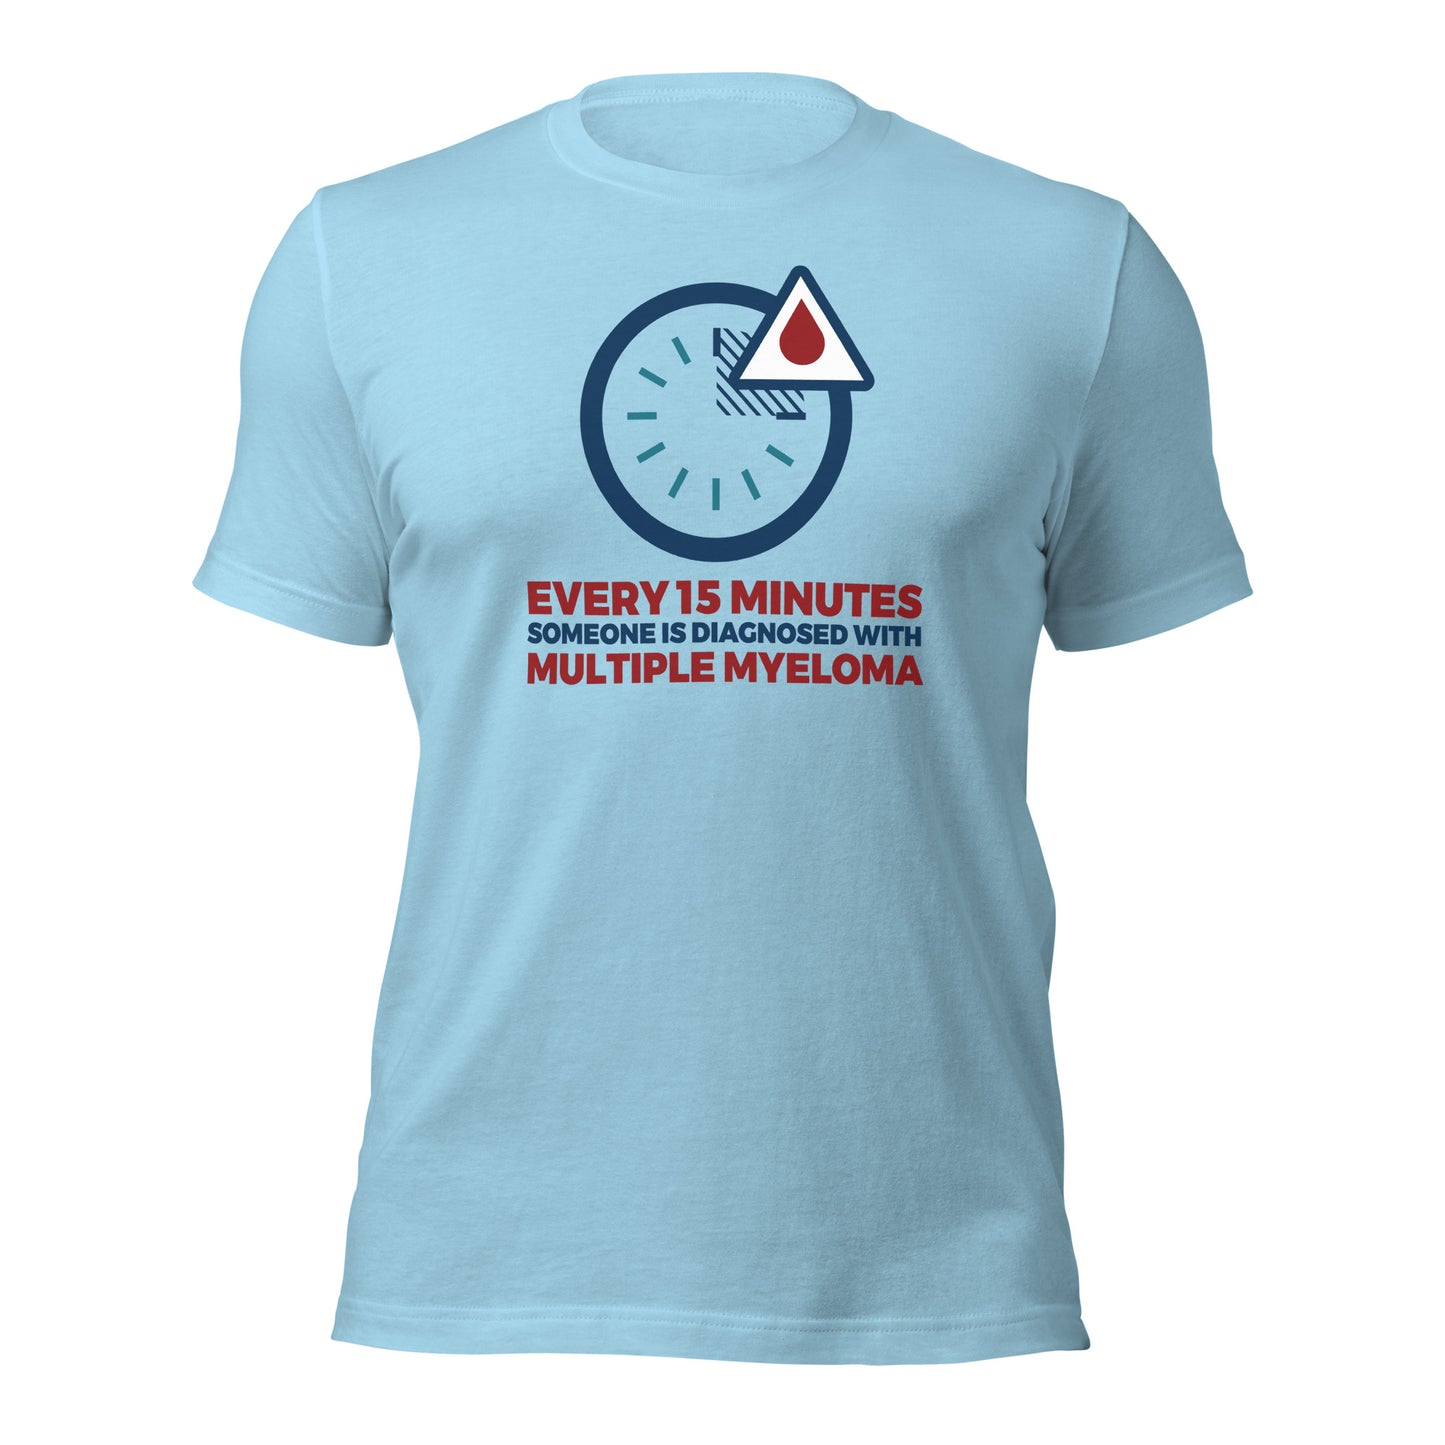 "Every 15 Minutes" Unisex t-shirt in light blue